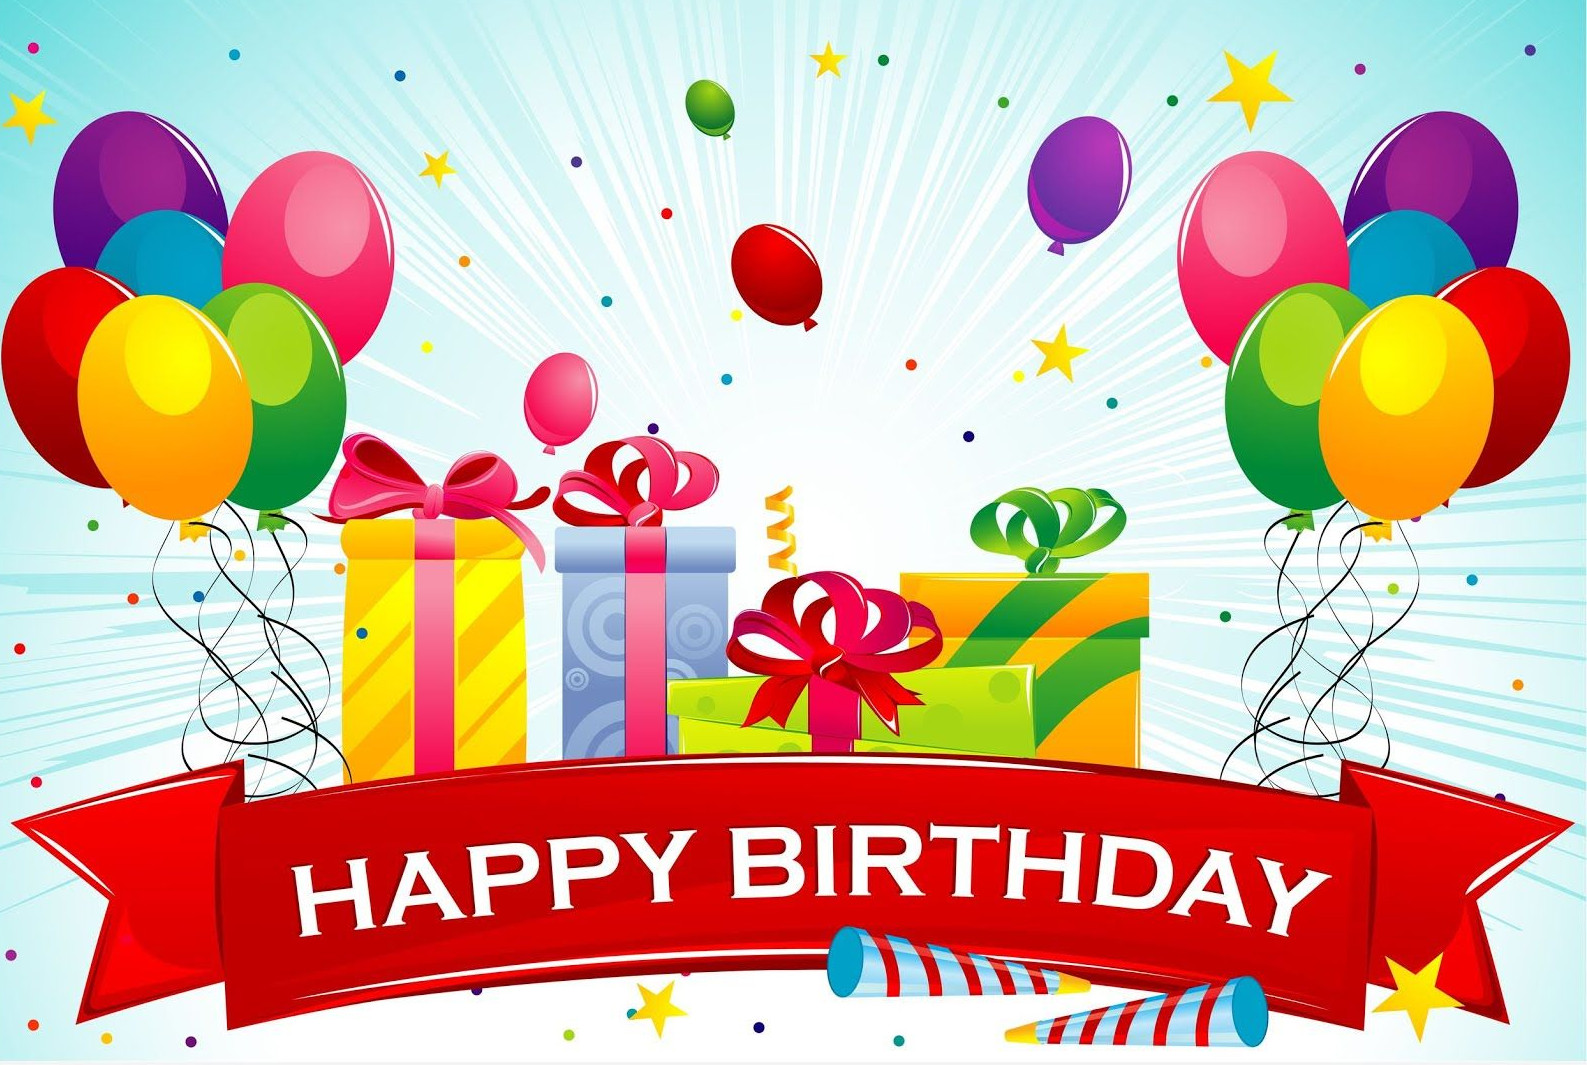 Free Happy Birthday Cards For Facebook
 35 Happy Birthday Cards Free To Download – The WoW Style